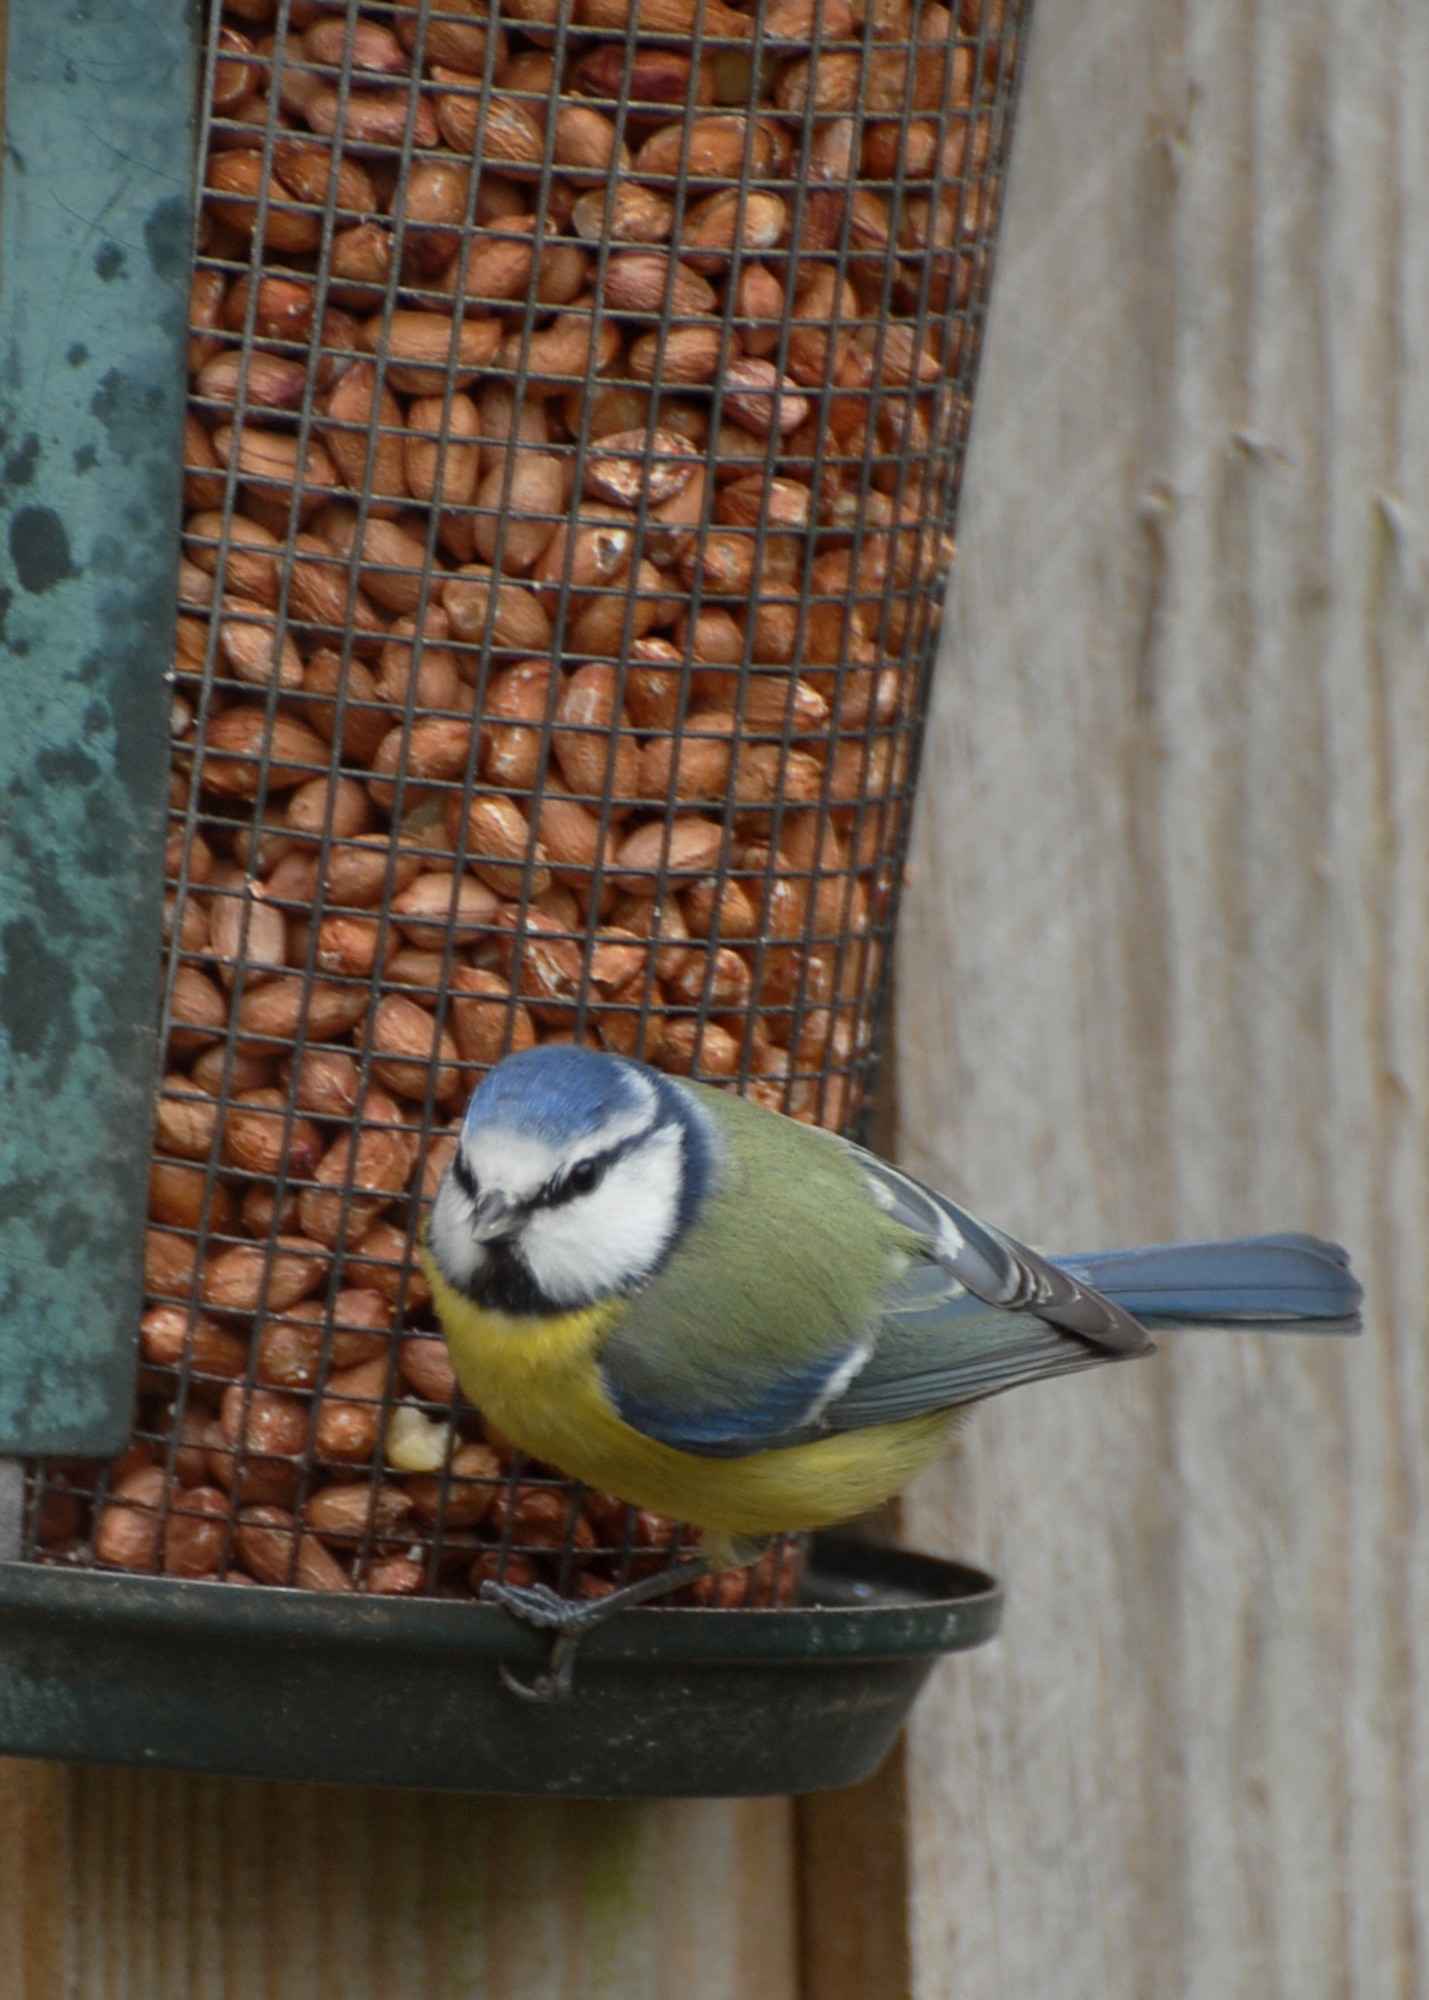 a Bluetit sits on a feeder filled with peanuts. (U.S. Air Force photo/Judith Wakelam